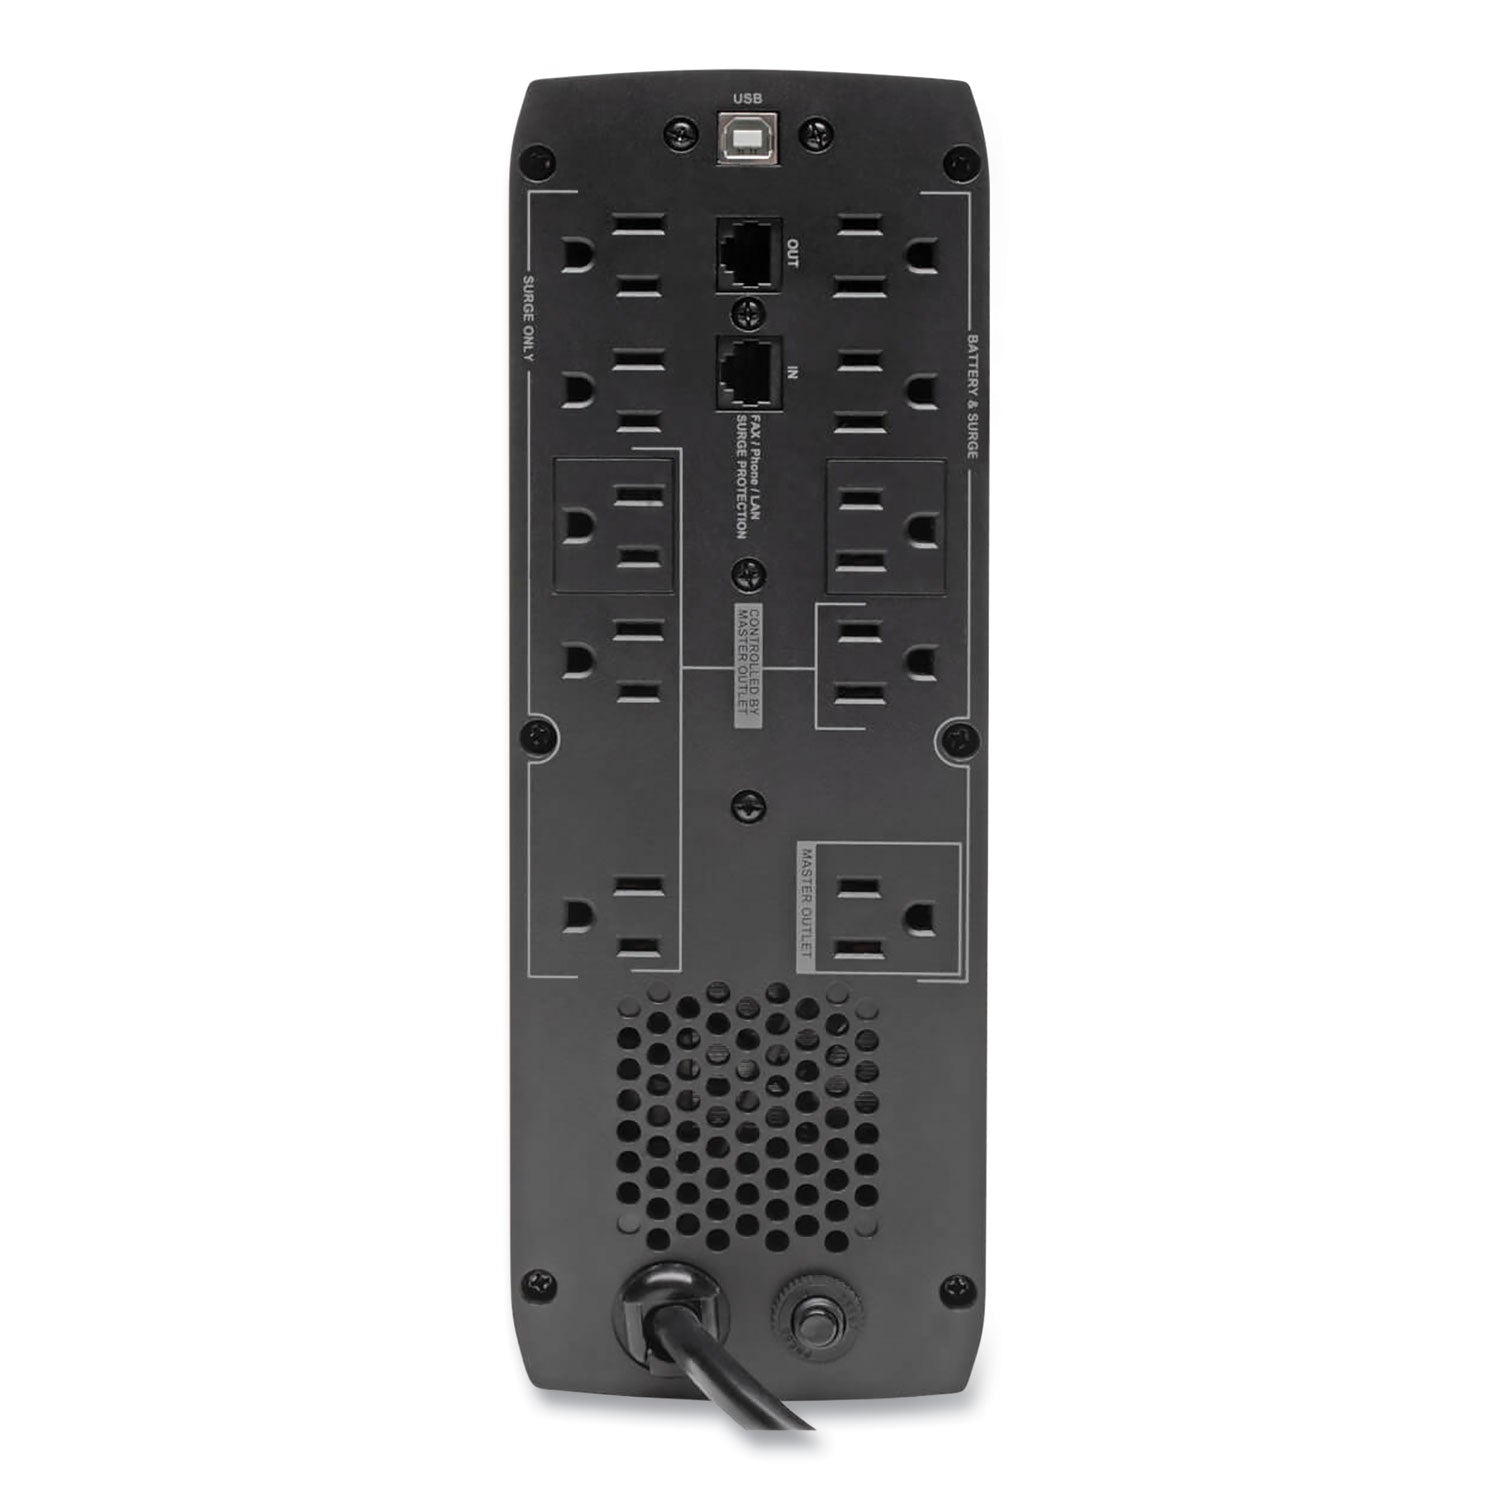 eco-series-desktop-ups-systems-with-usb-monitoring-10-outlets-1440-va-316-j_trpeco1500lcd - 2